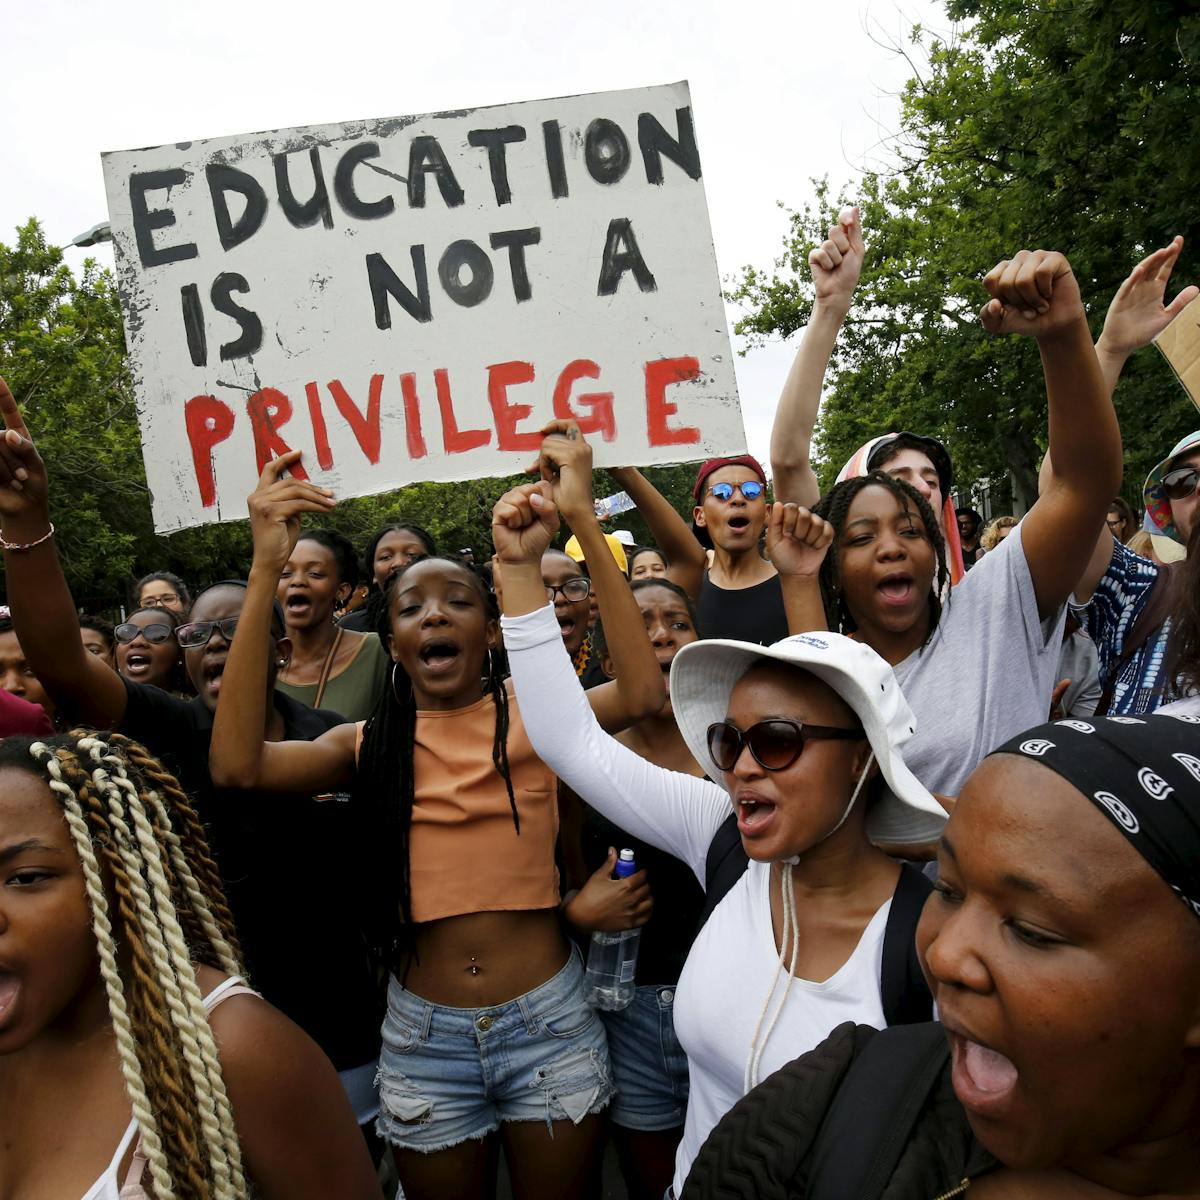 Free university education is not the route to social justice